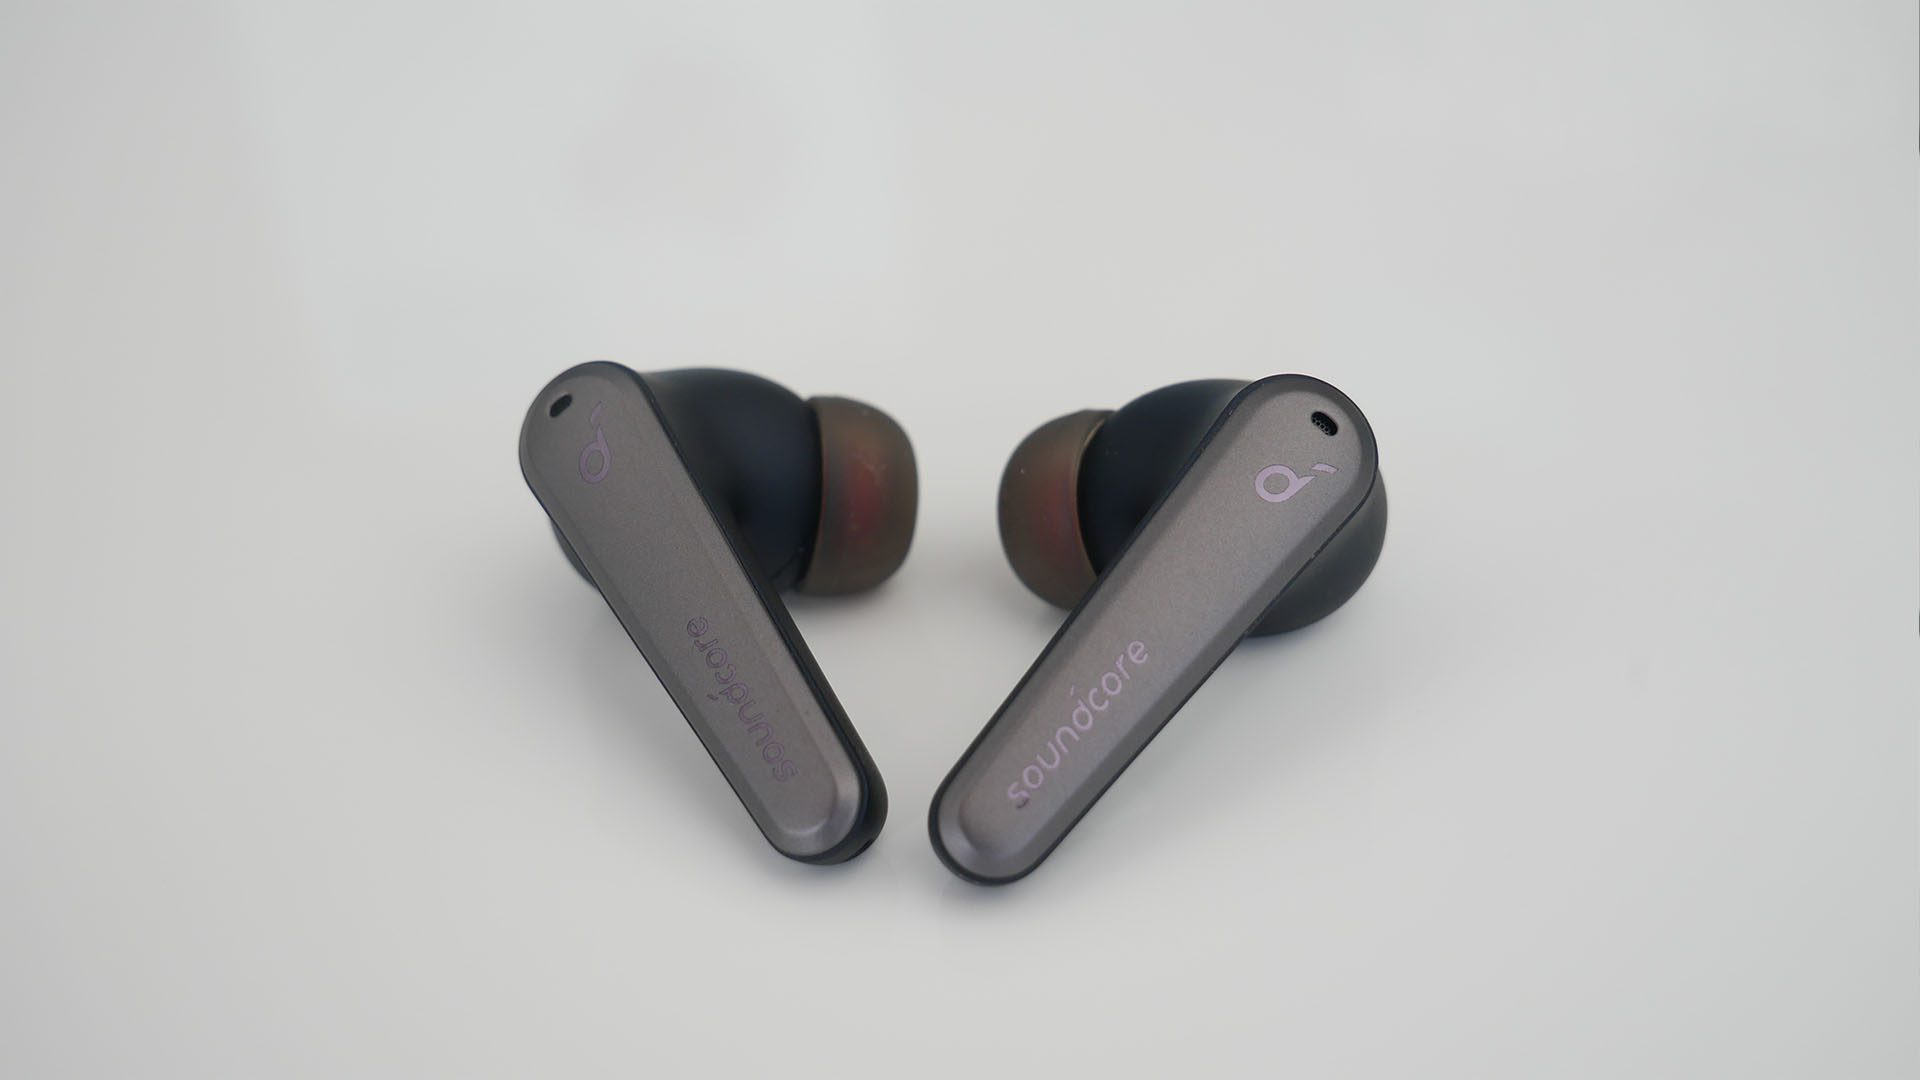 Image of Liberty Air Pro earbuds from Soundcore